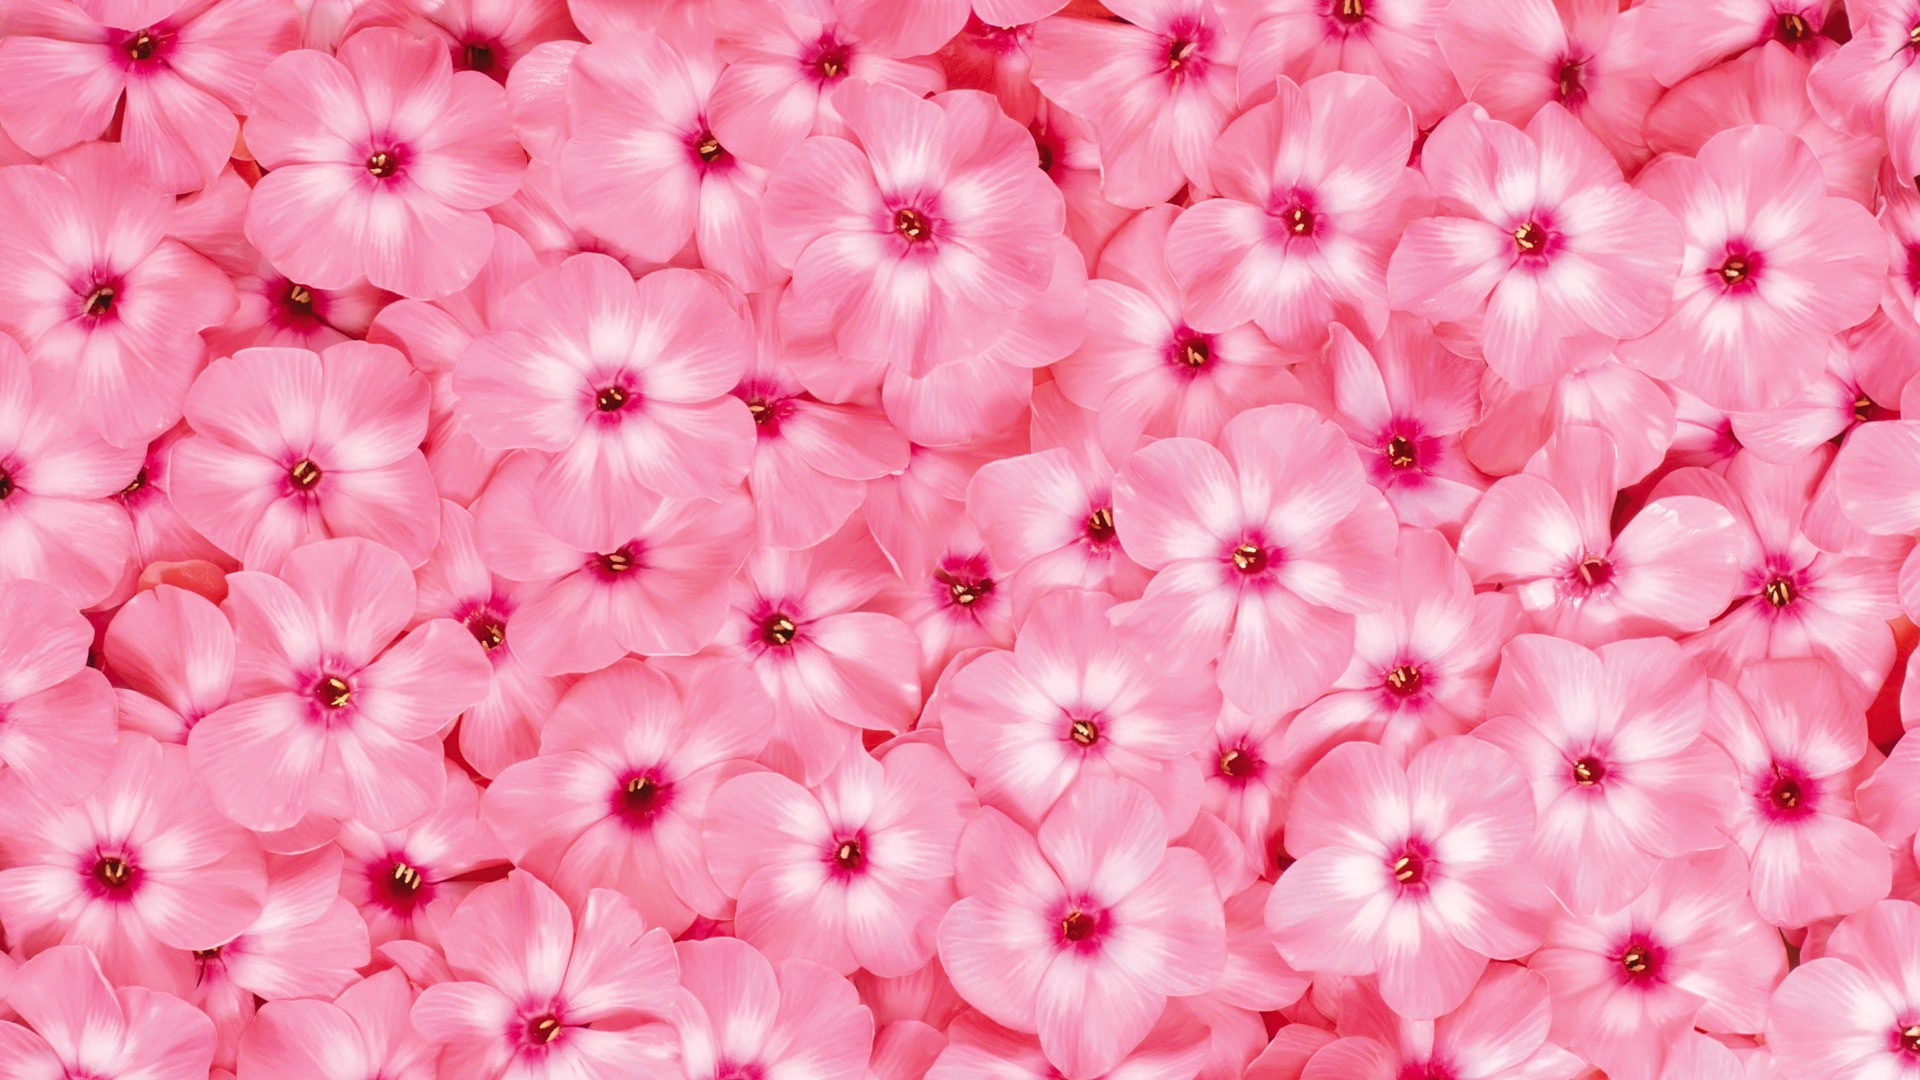 Surrounded by stunning flowers wallpaper #14 - 1920x1080